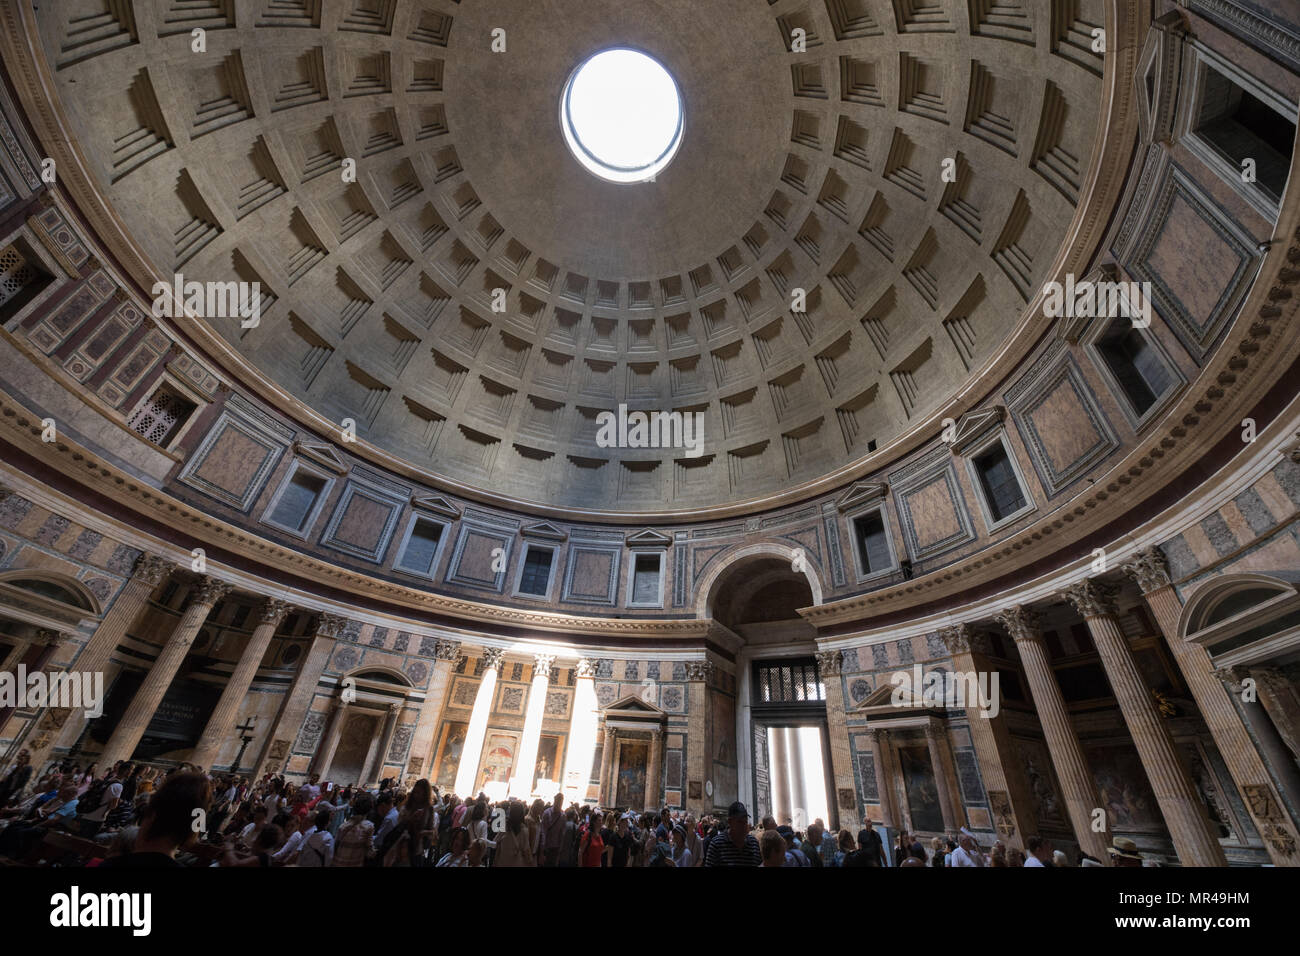 Rome Italy, Pantheon interior scene, crowd of tourists visiting the capital city monuments Stock Photo